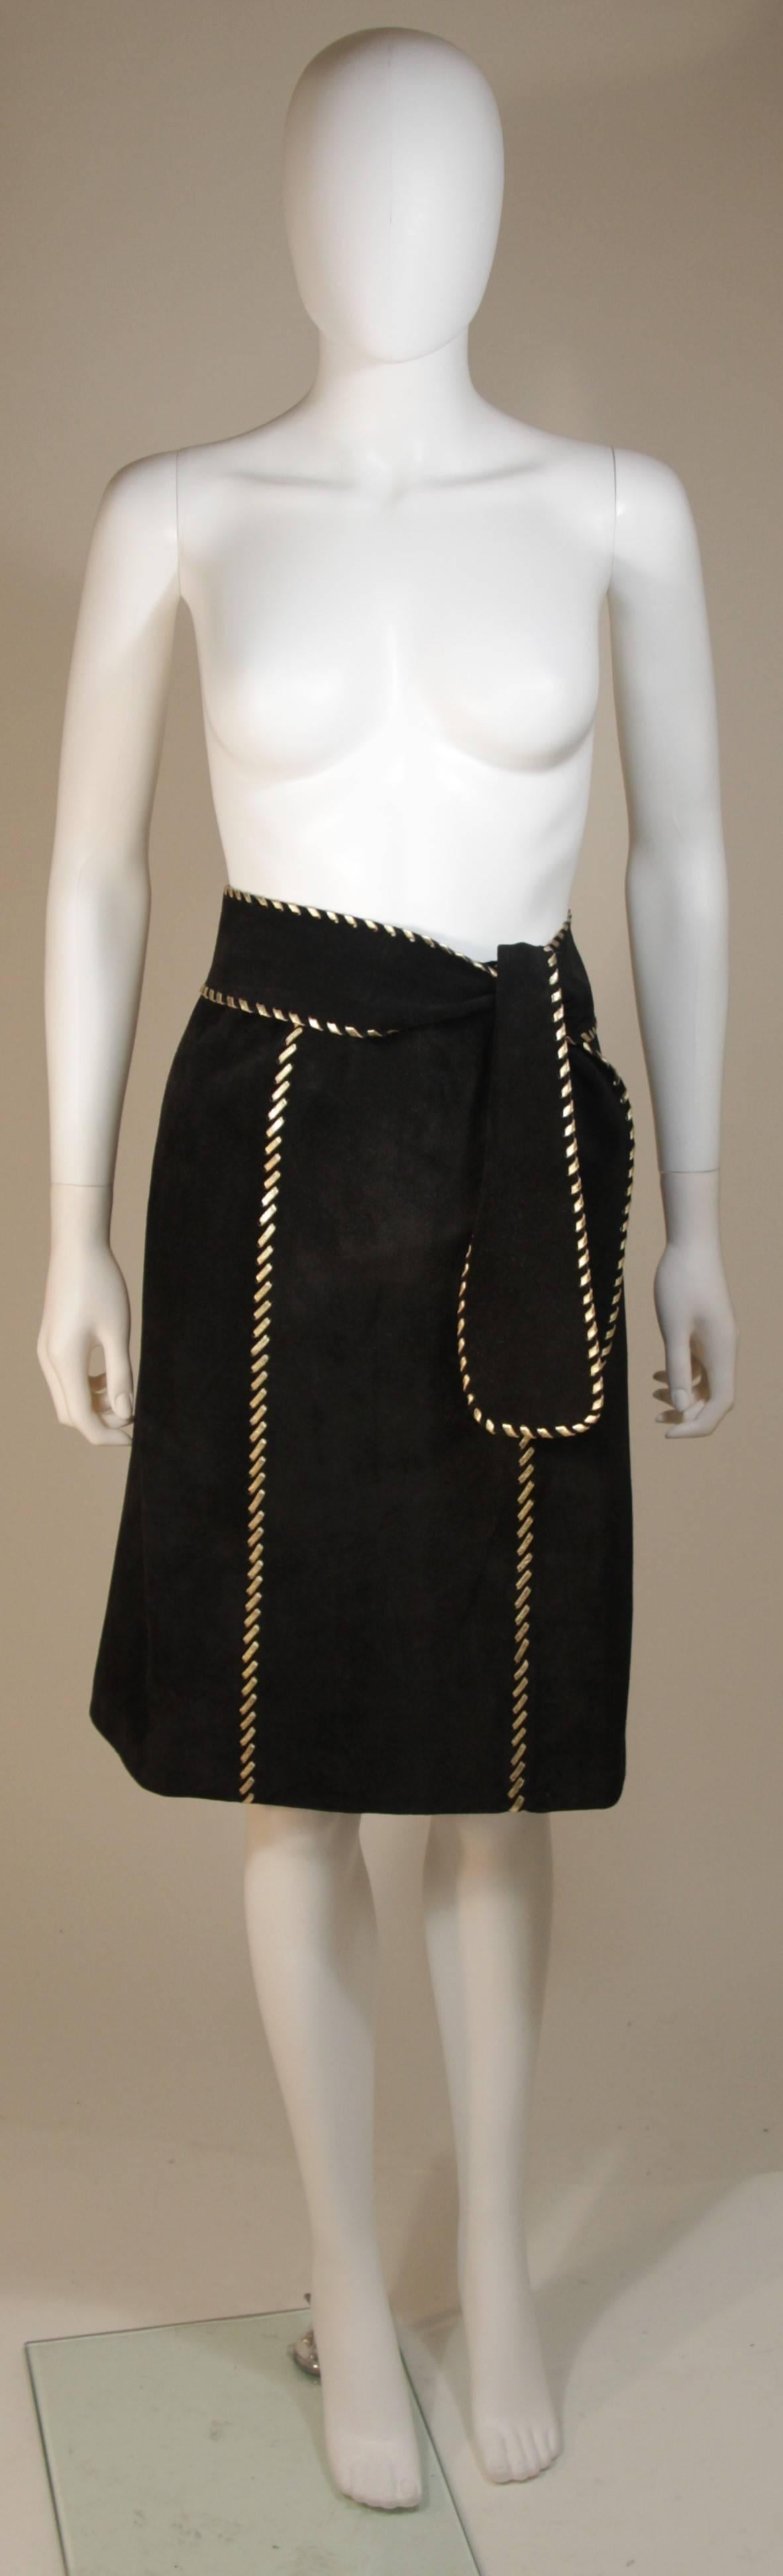 This Yves Saint Laurent  is composed of a black sueded and features gold stitch details. There is a center back zipper closure. In excellent condition, comes with belt. Made in France.

  **Please cross-reference measurements for personal